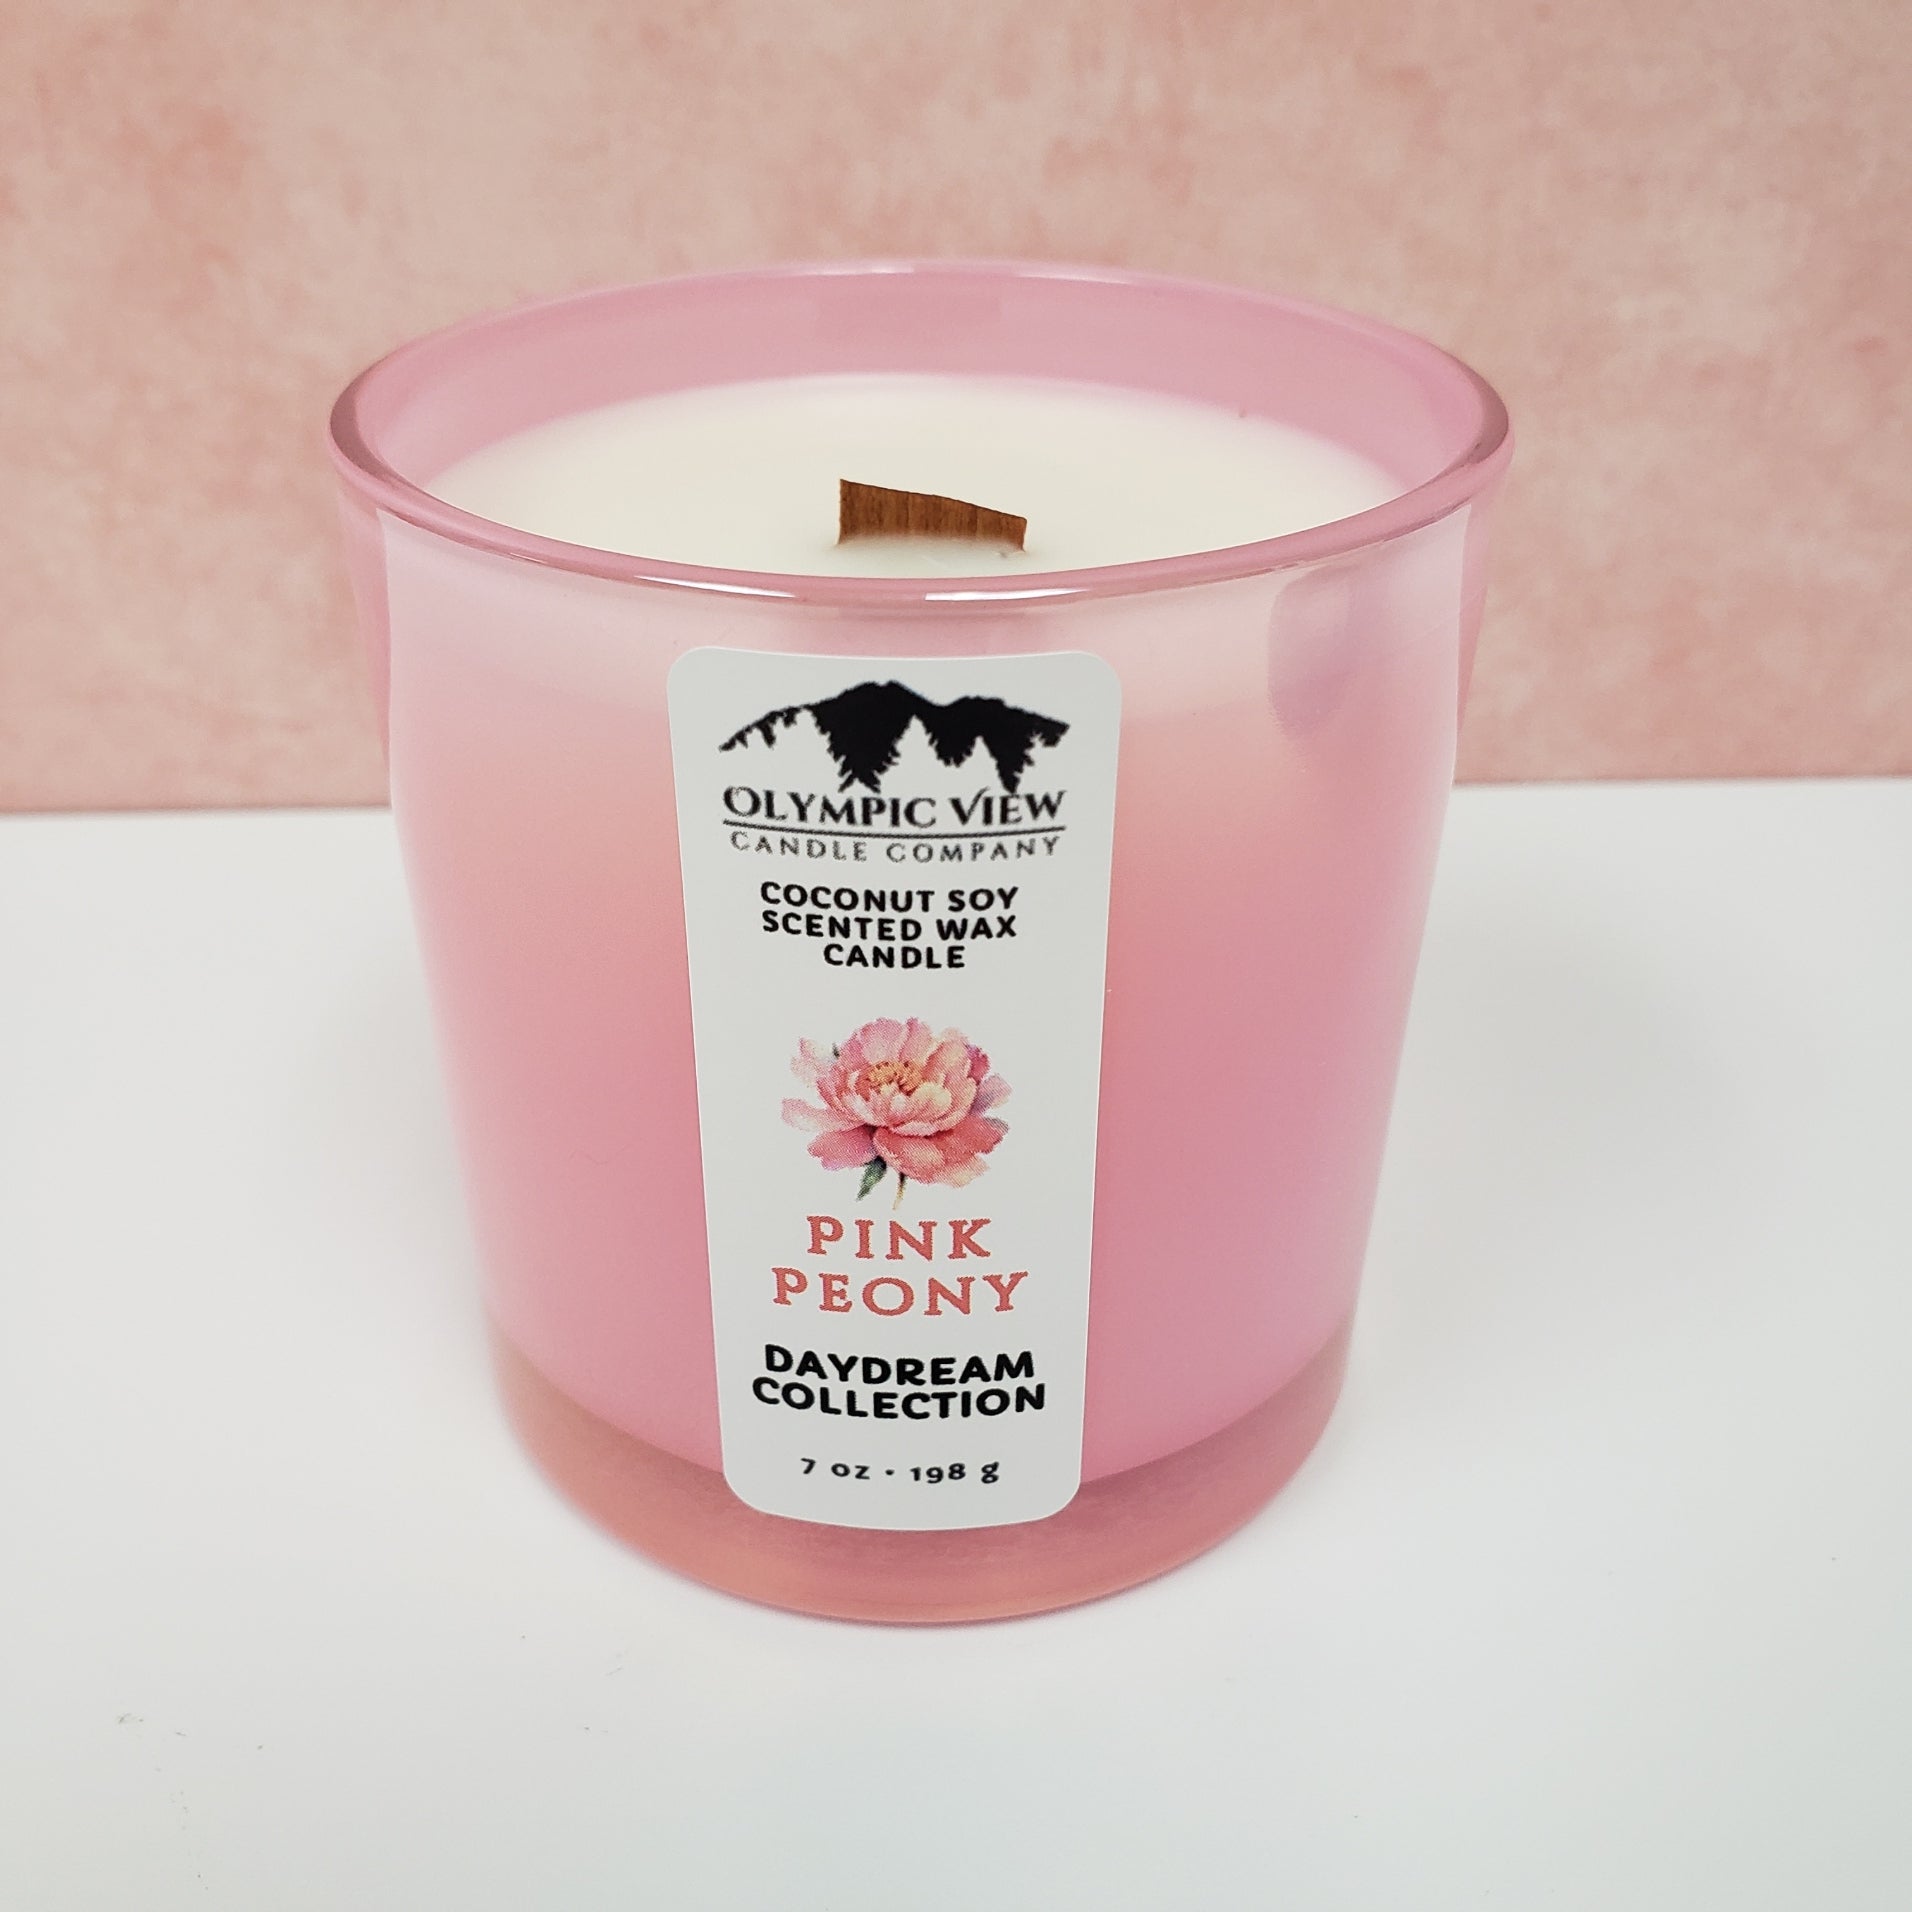 Pink Peony wooden wicked candle in a Unicorn Pink jar.  Hand poured by Olympic View Candle.